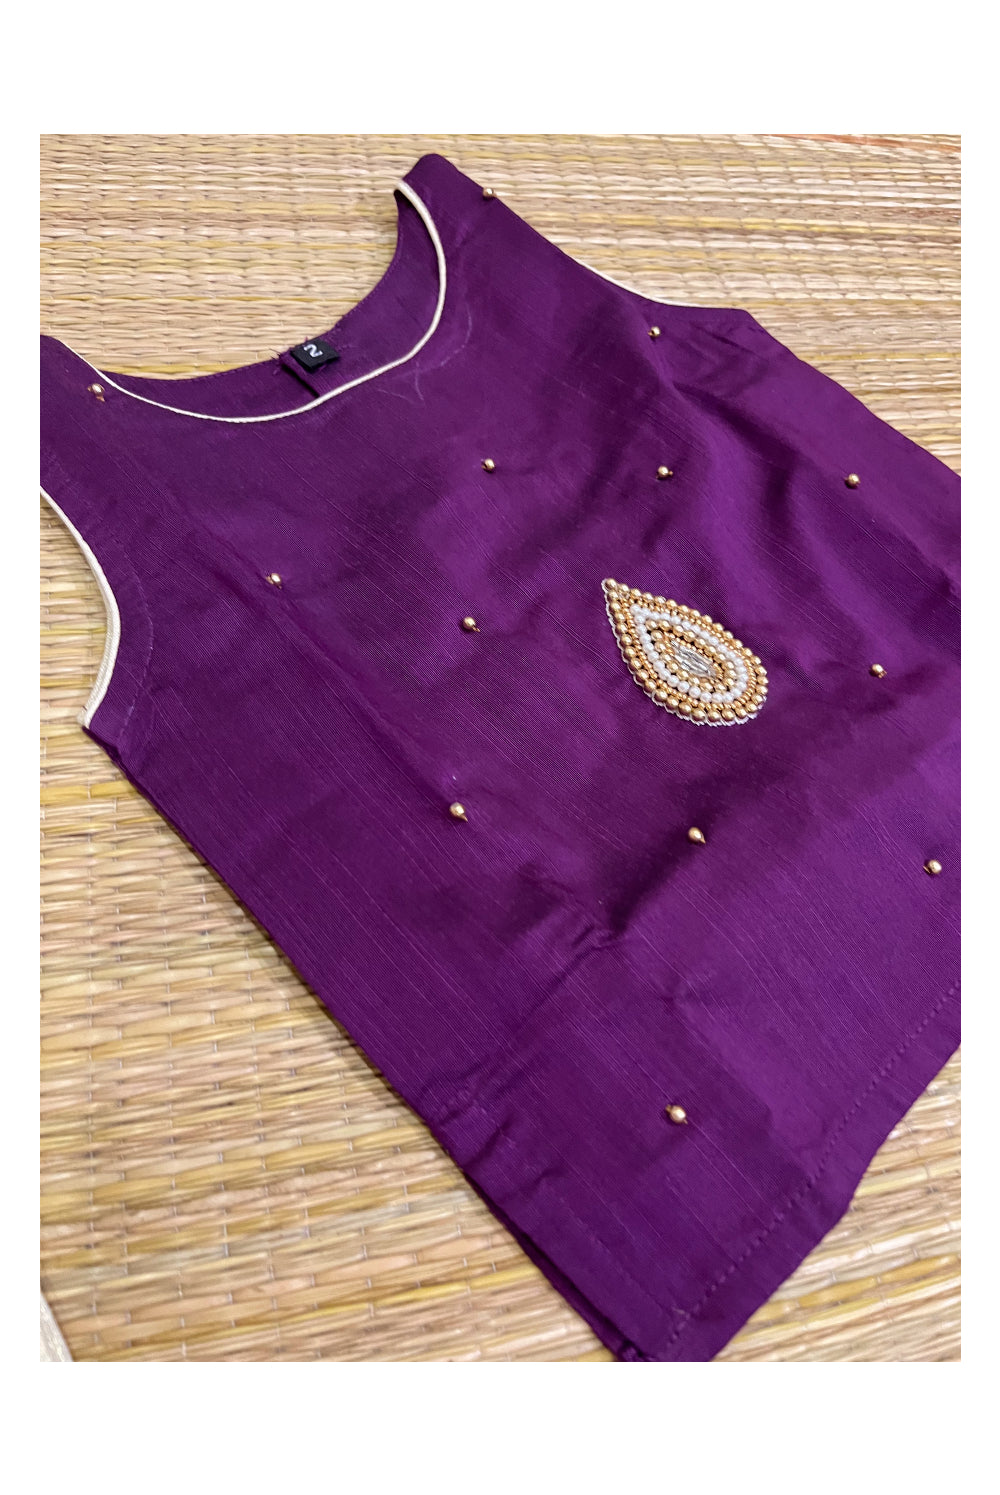 Southloom Kerala Pavada Blouse with Violet Bead Work Design (Age - 8 Year)